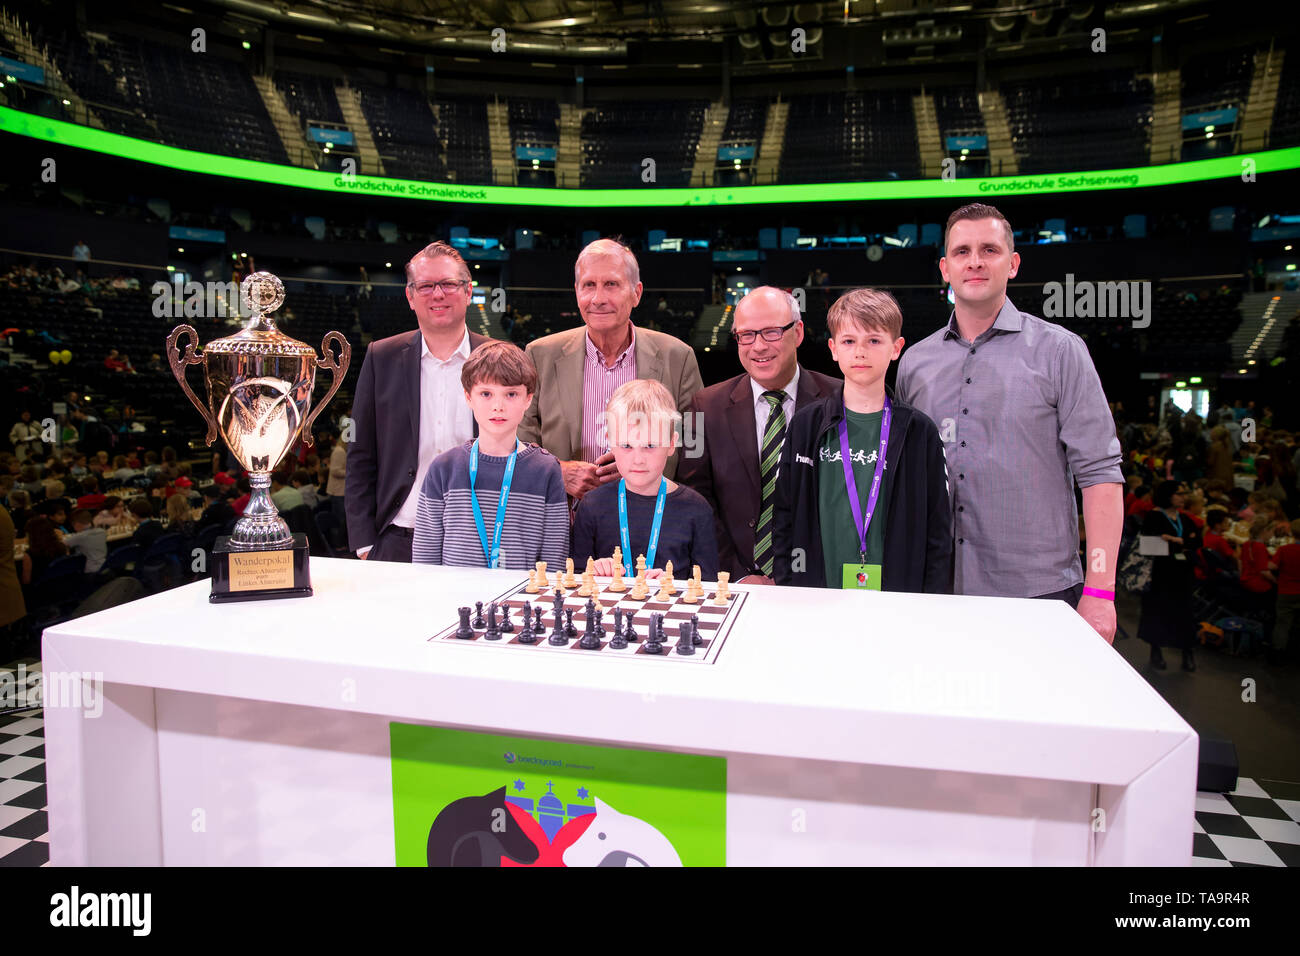 Hamburg, Germany. 23rd May, 2019. Arndt Frantzen (l-r), Chief Commercial Officer Barclaycard, Fridjef Hauschild, pupil of the school in the Alte Forst, Ulrich Wickert, ex-Tagesthemen moderator, Jari Dieckmann, pupil of the school in the Alte Forst, school senator Thies Rabe, Thome Teßmann (pupil of the school Genslerstraße) and Thomas Peters, moderator of the event, About 4000 pupils take part in the 61st edition of the tournament. According to the organizer, it is the world's largest chess tournament. Credit: Felix König/dpa/Alamy Live News Stock Photo